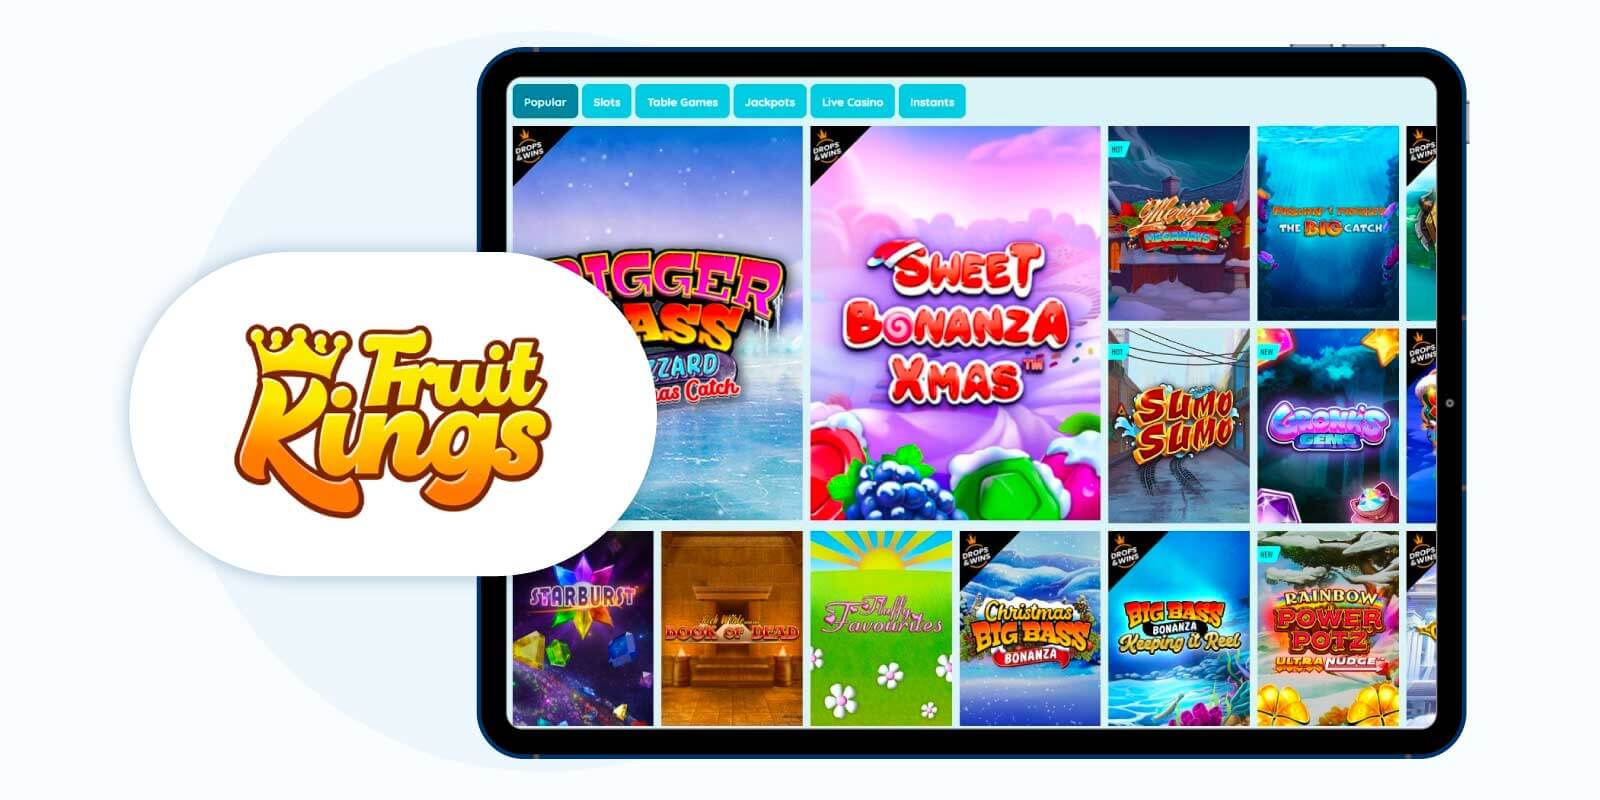 #4. FruitKings Casino: Best Evolution Casino with Unlimited Withdrawal Perk